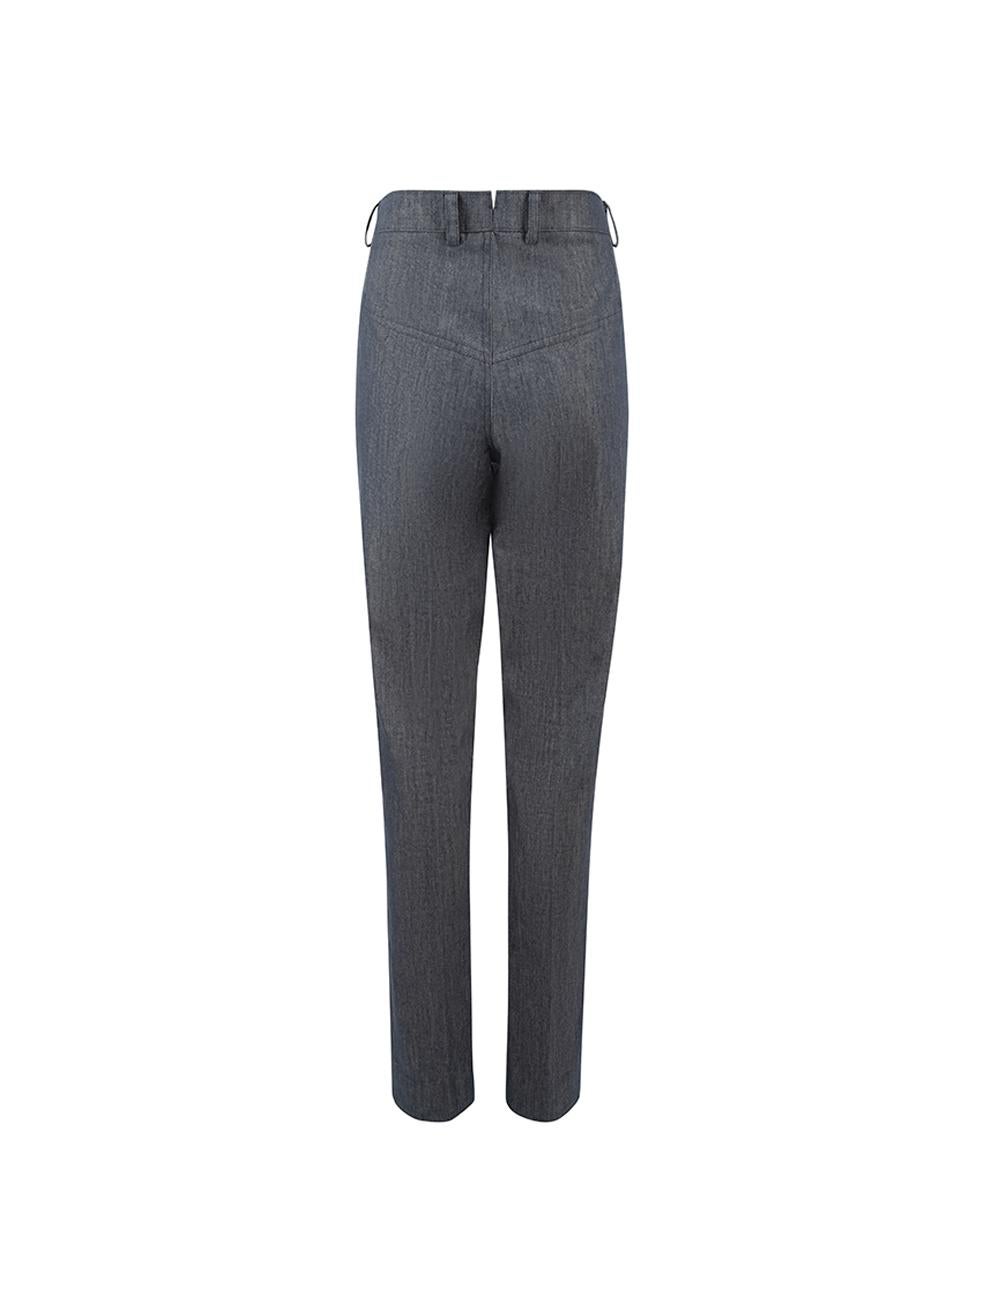 Sanne Women's Grey Leather Accent Pocket Trousers In Good Condition For Sale In London, GB